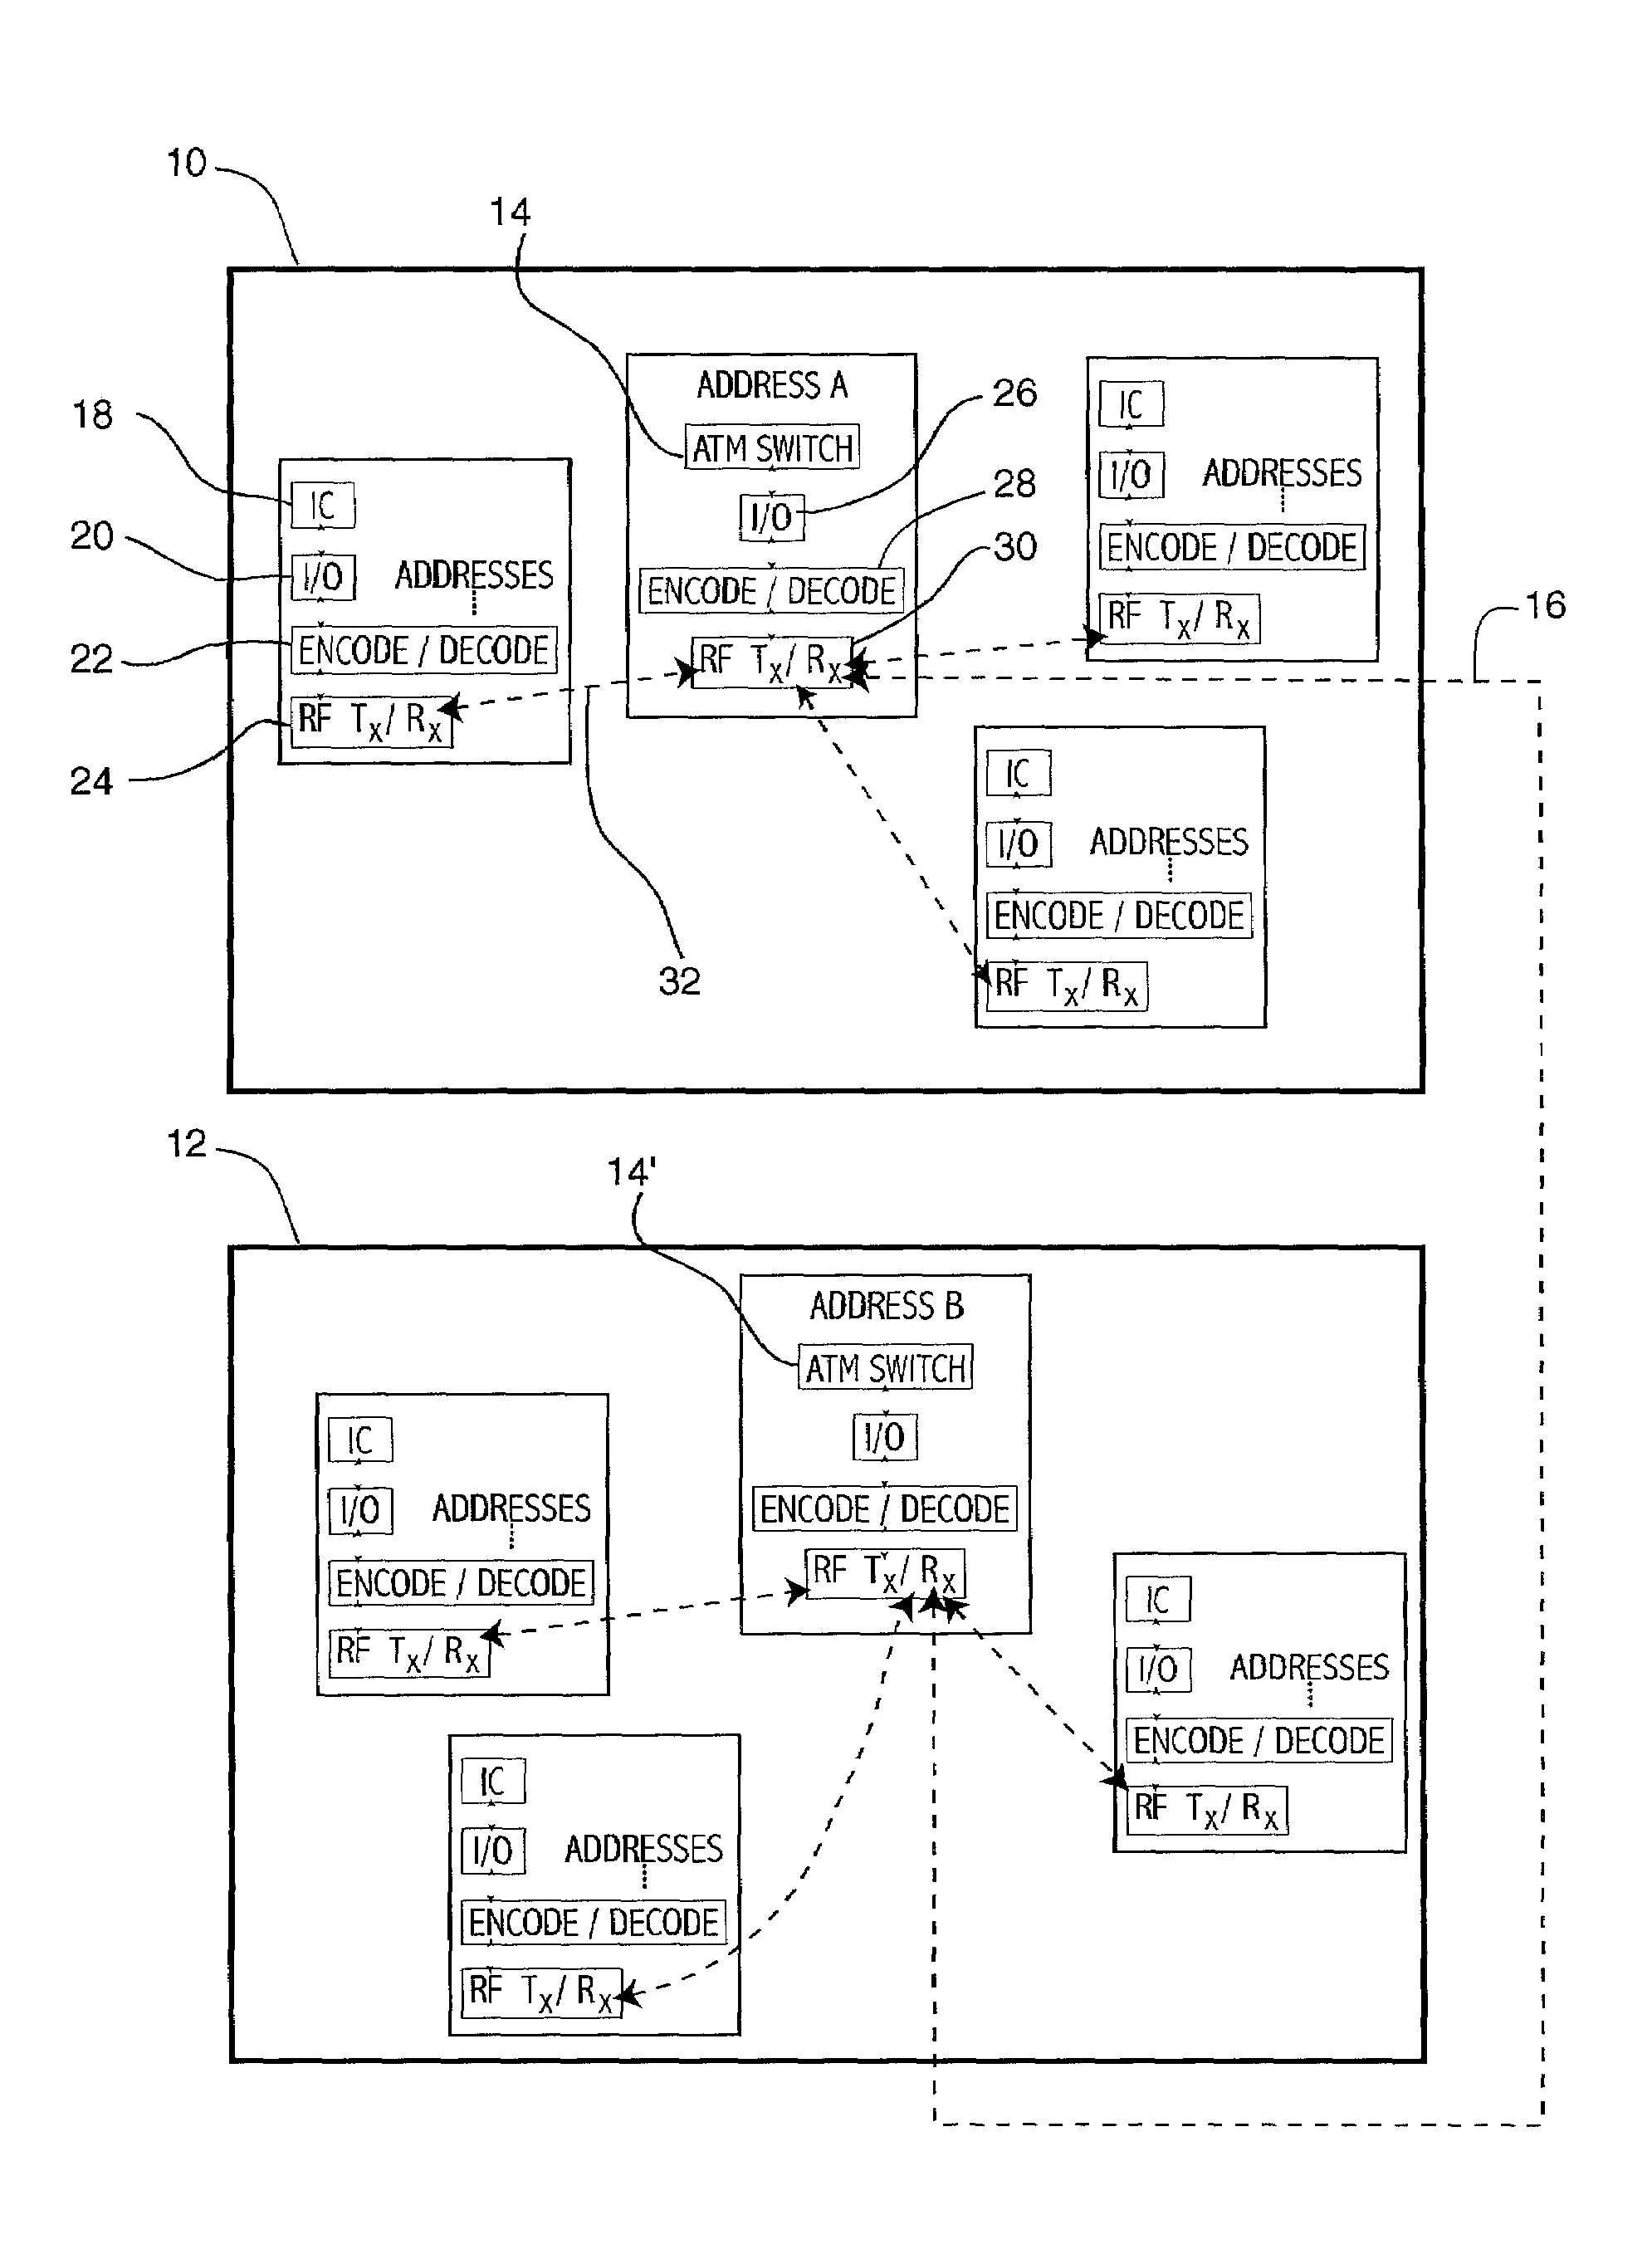 Localized radio frequency communication using asynchronous transfer mode protocol